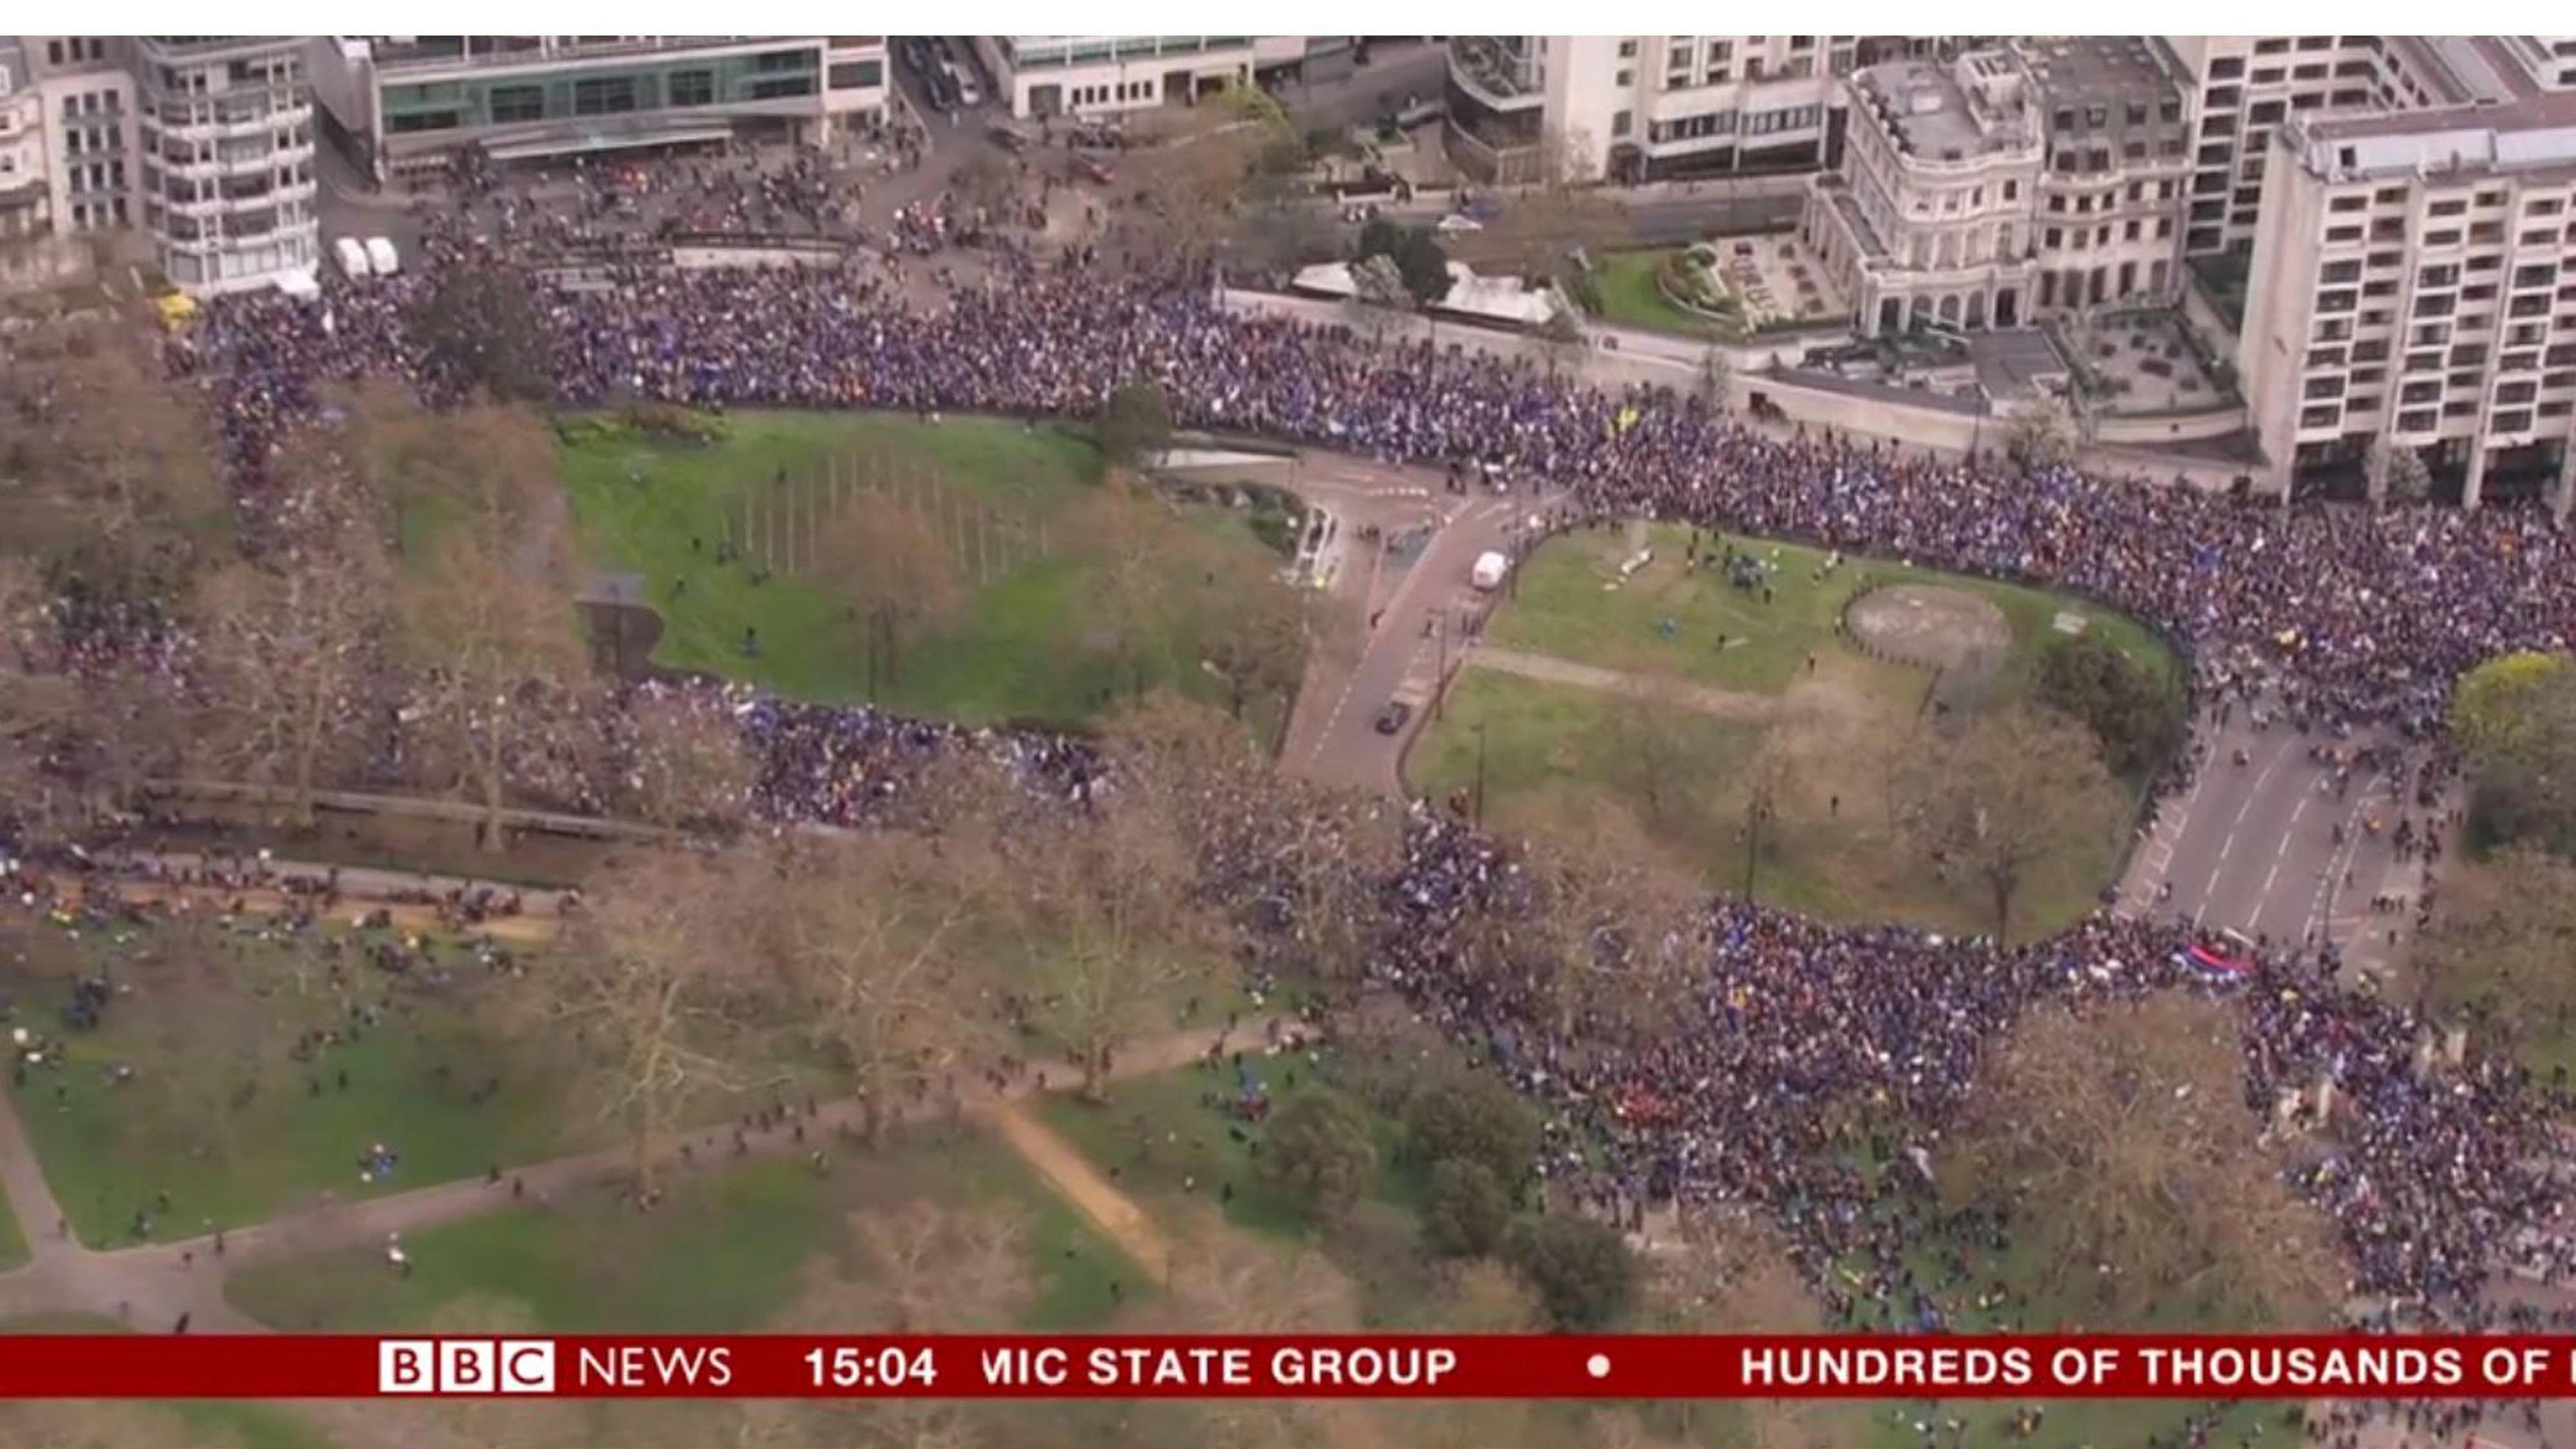 Screengrab taken from BBC News of an aerial view of the anti-Brexit campaigners marching in London